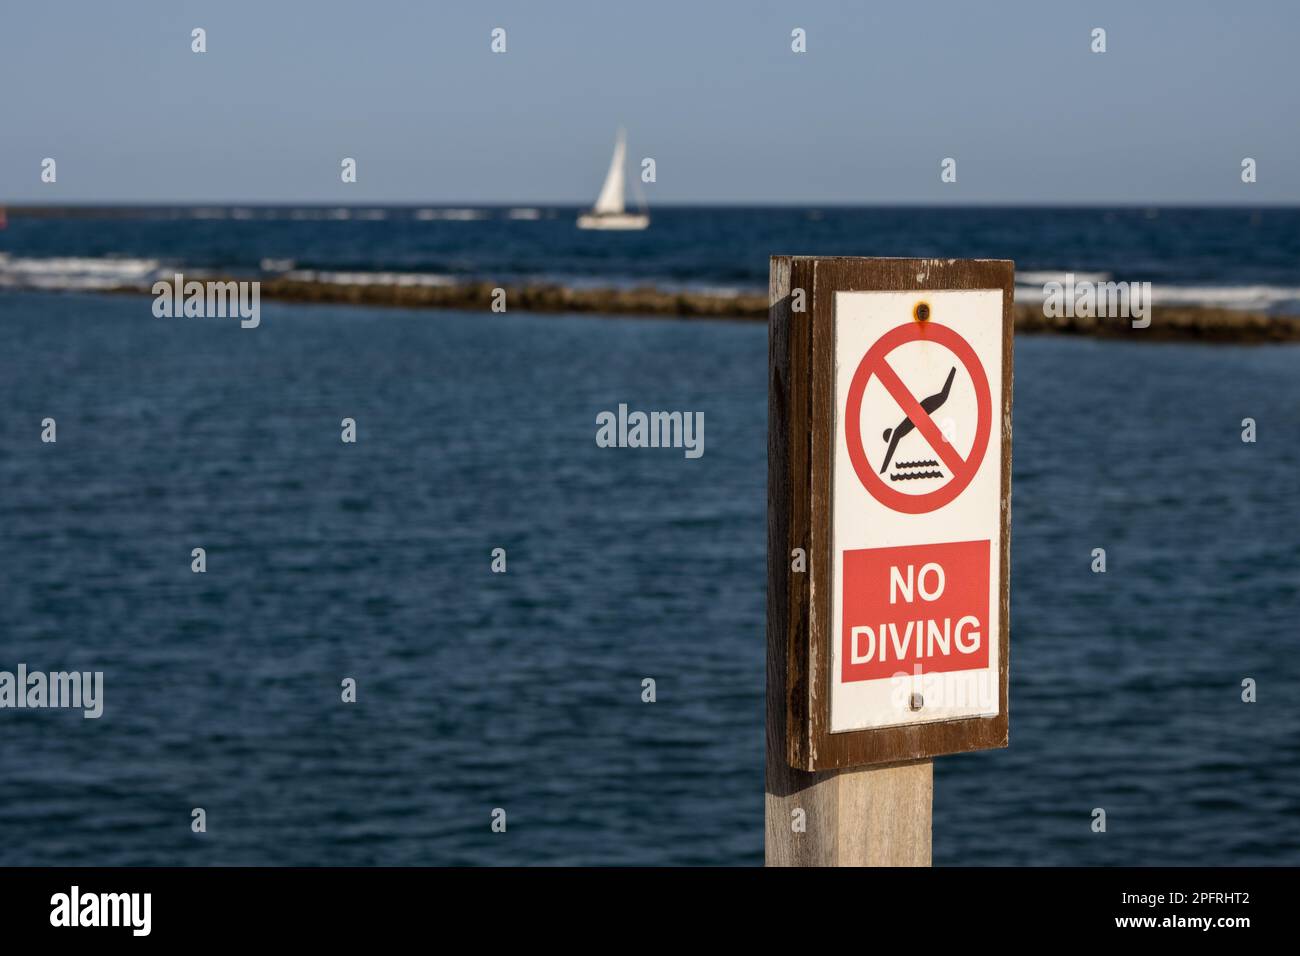 No diving advice on a wooden board. Atlantic ocean and a sailing boat in the blurry background. Blue sky. Fuerteventura, Canary Islands, Spain, Europe Stock Photo